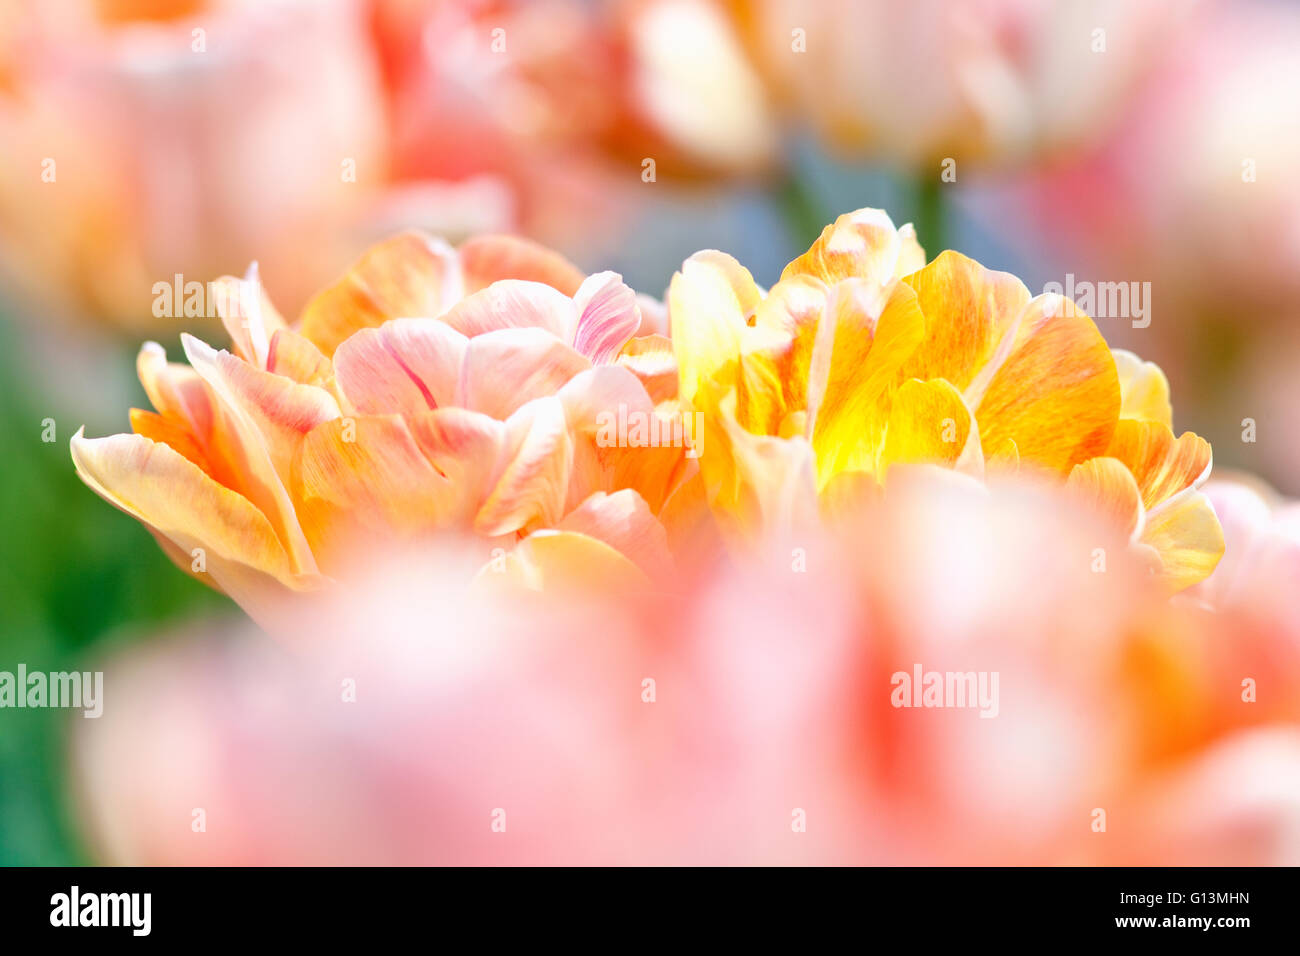 Closeup of Tulip Flower at Blossom in Spring Stock Photo